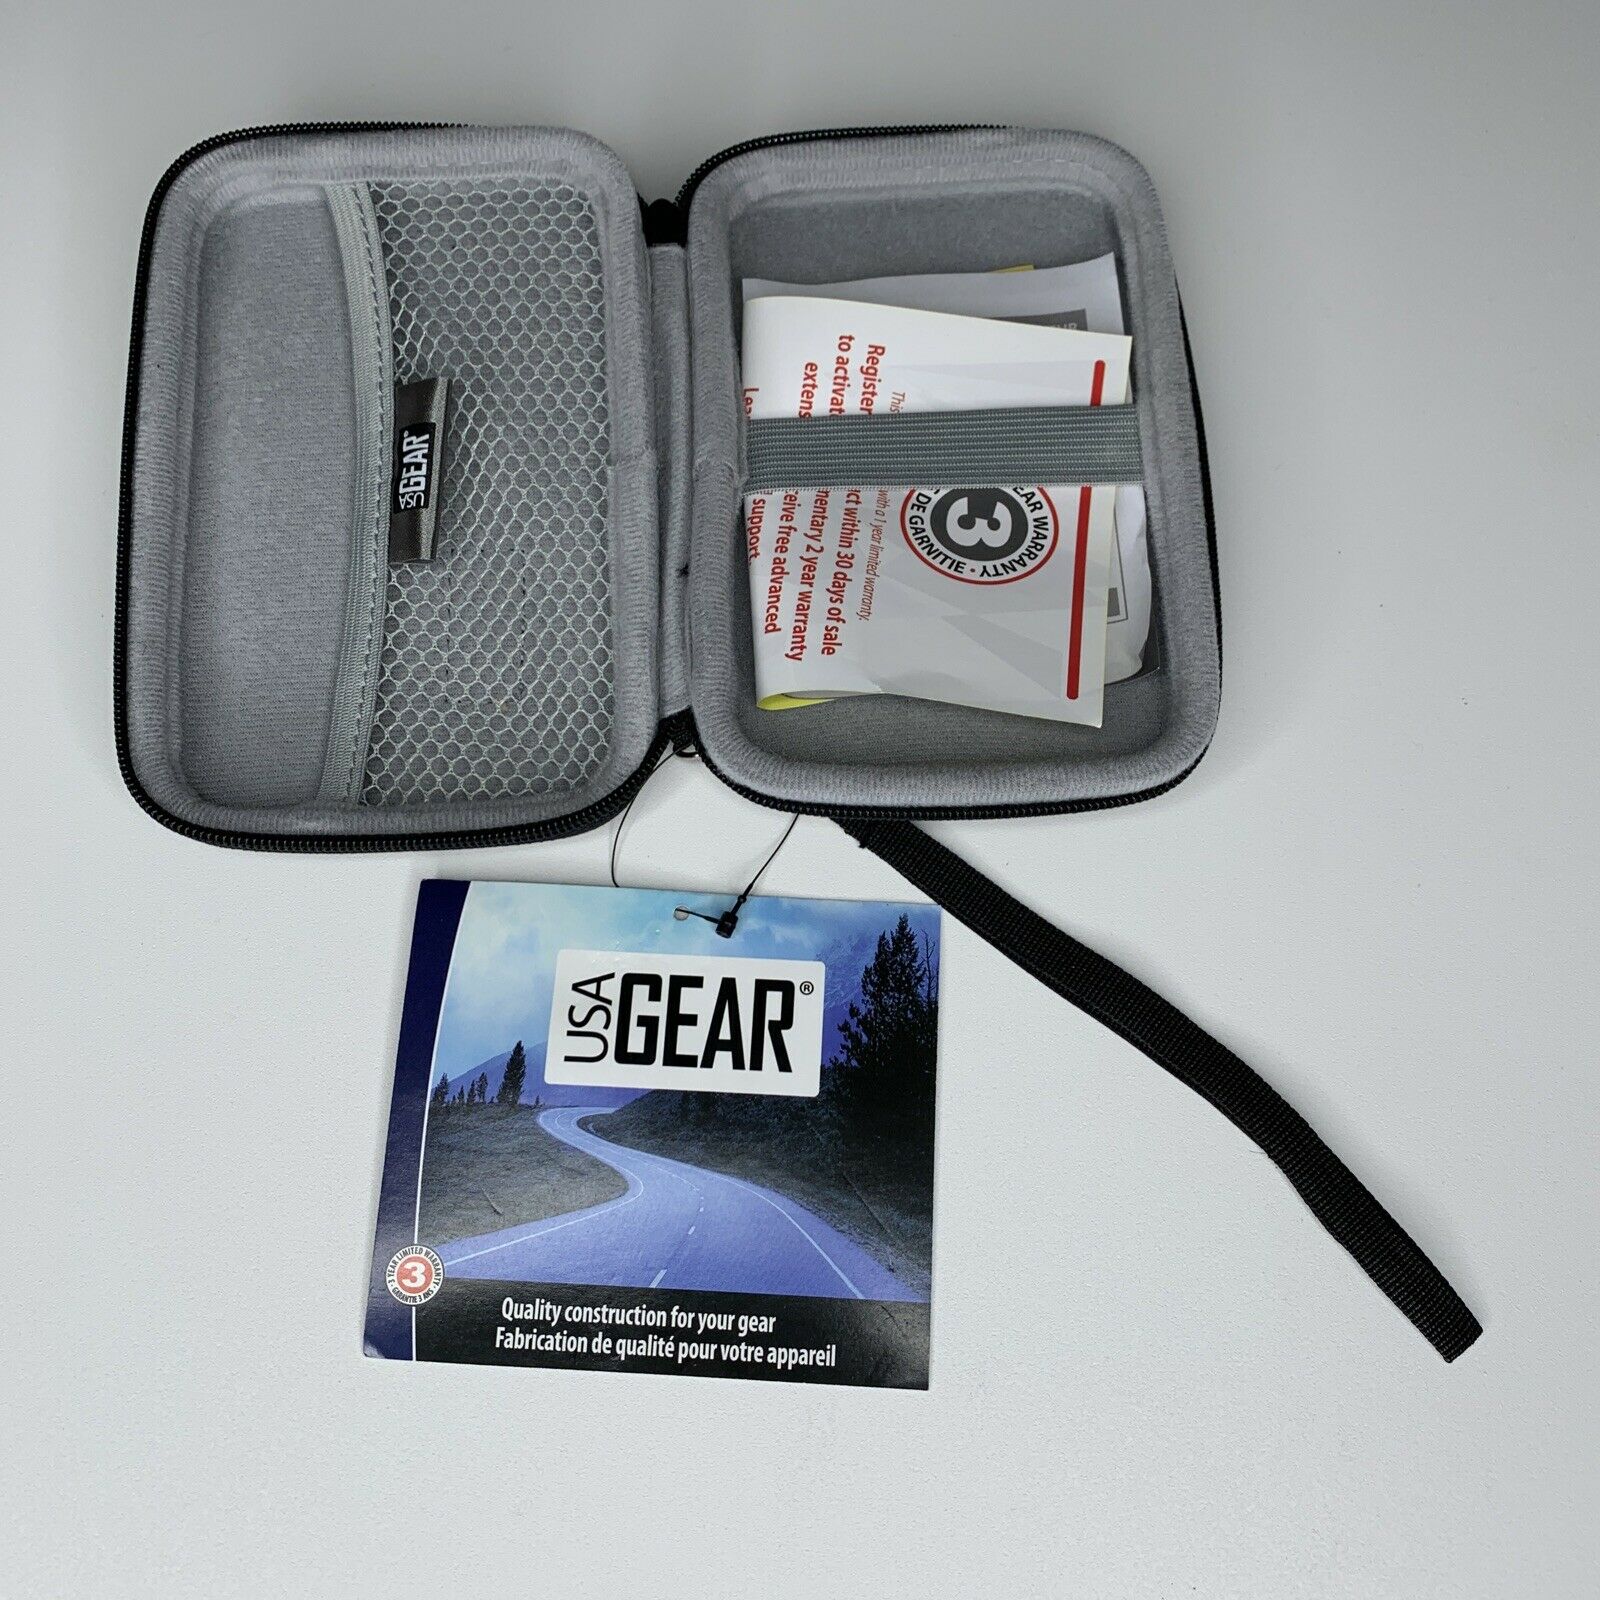 Usa Gear Carrying Case 4" X 6" Digital Devices Edc